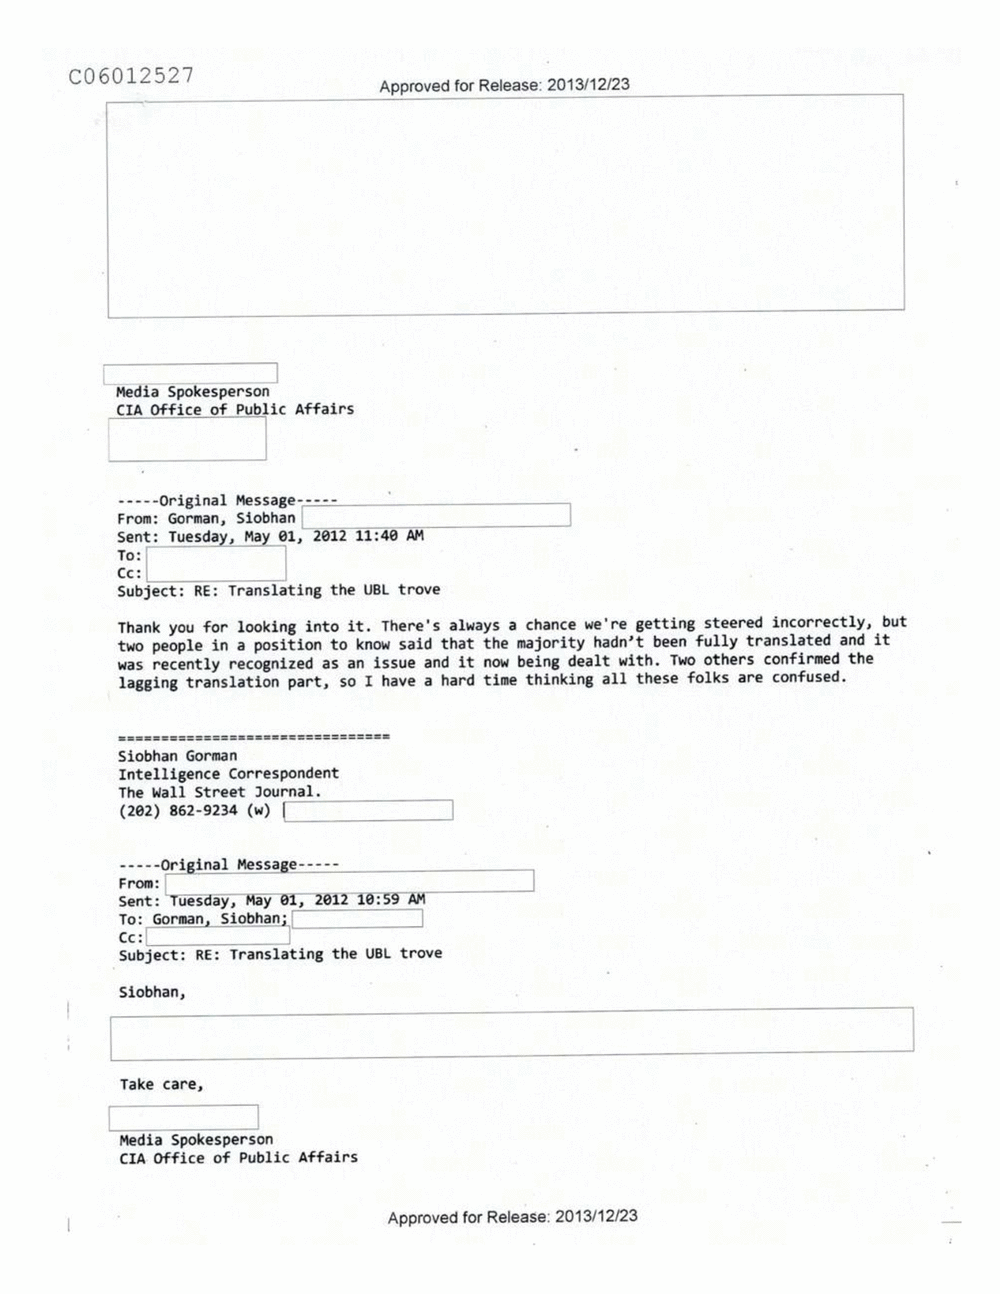 Page 51 from Email Correspondence Between Reporters and CIA Flacks